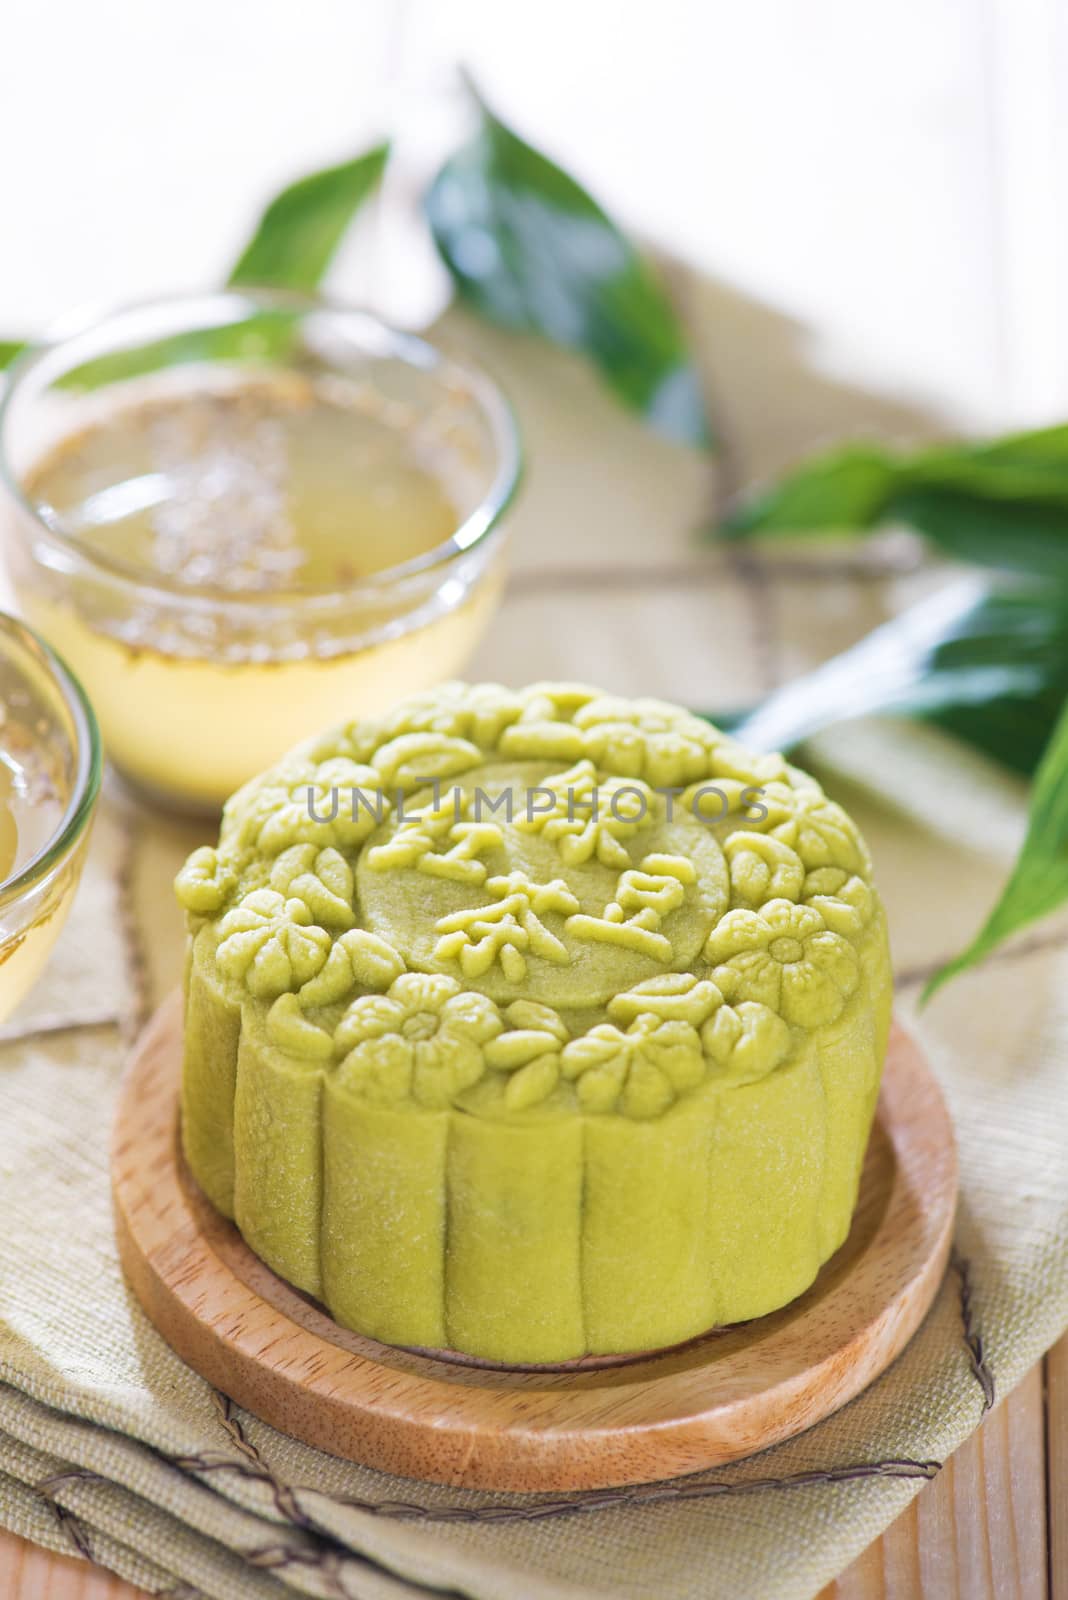 Traditional Chinese mid autumn festival food. Snowy skin mooncakes.  The Chinese words on the mooncakes means green tea with red bean paste, not a logo or trademark.